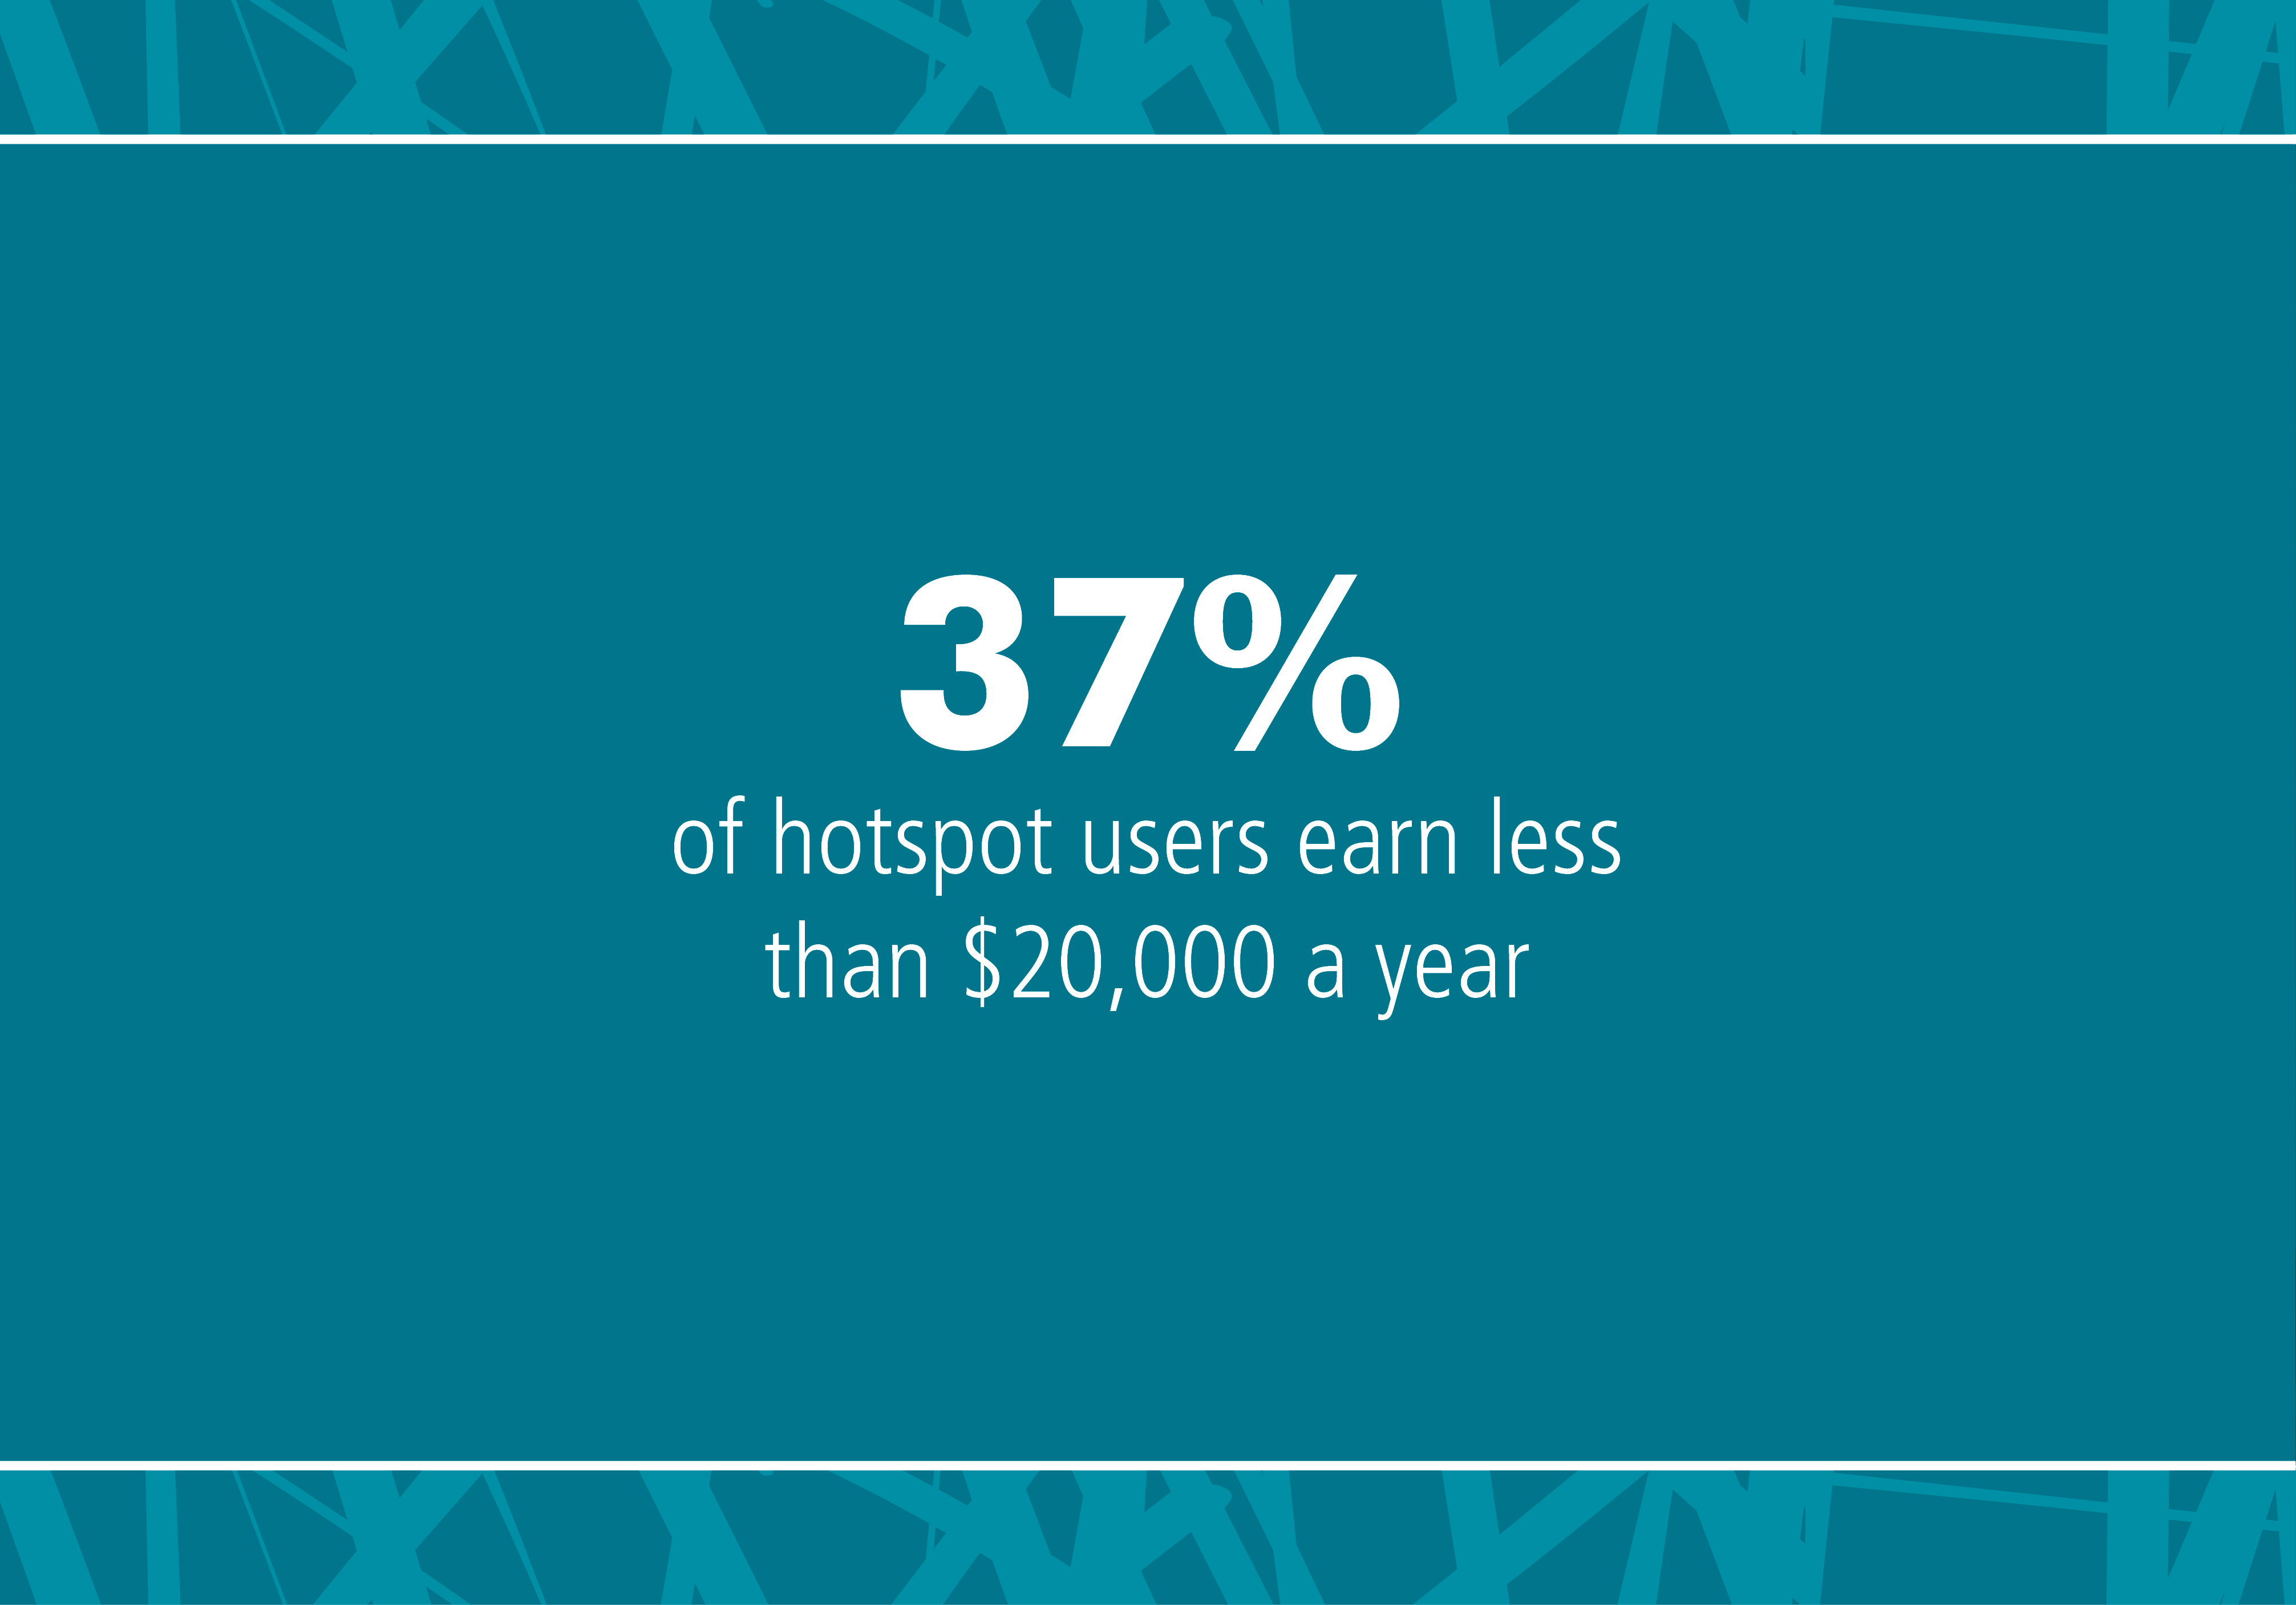 37% of hotspot users earn less than $20,000 a year